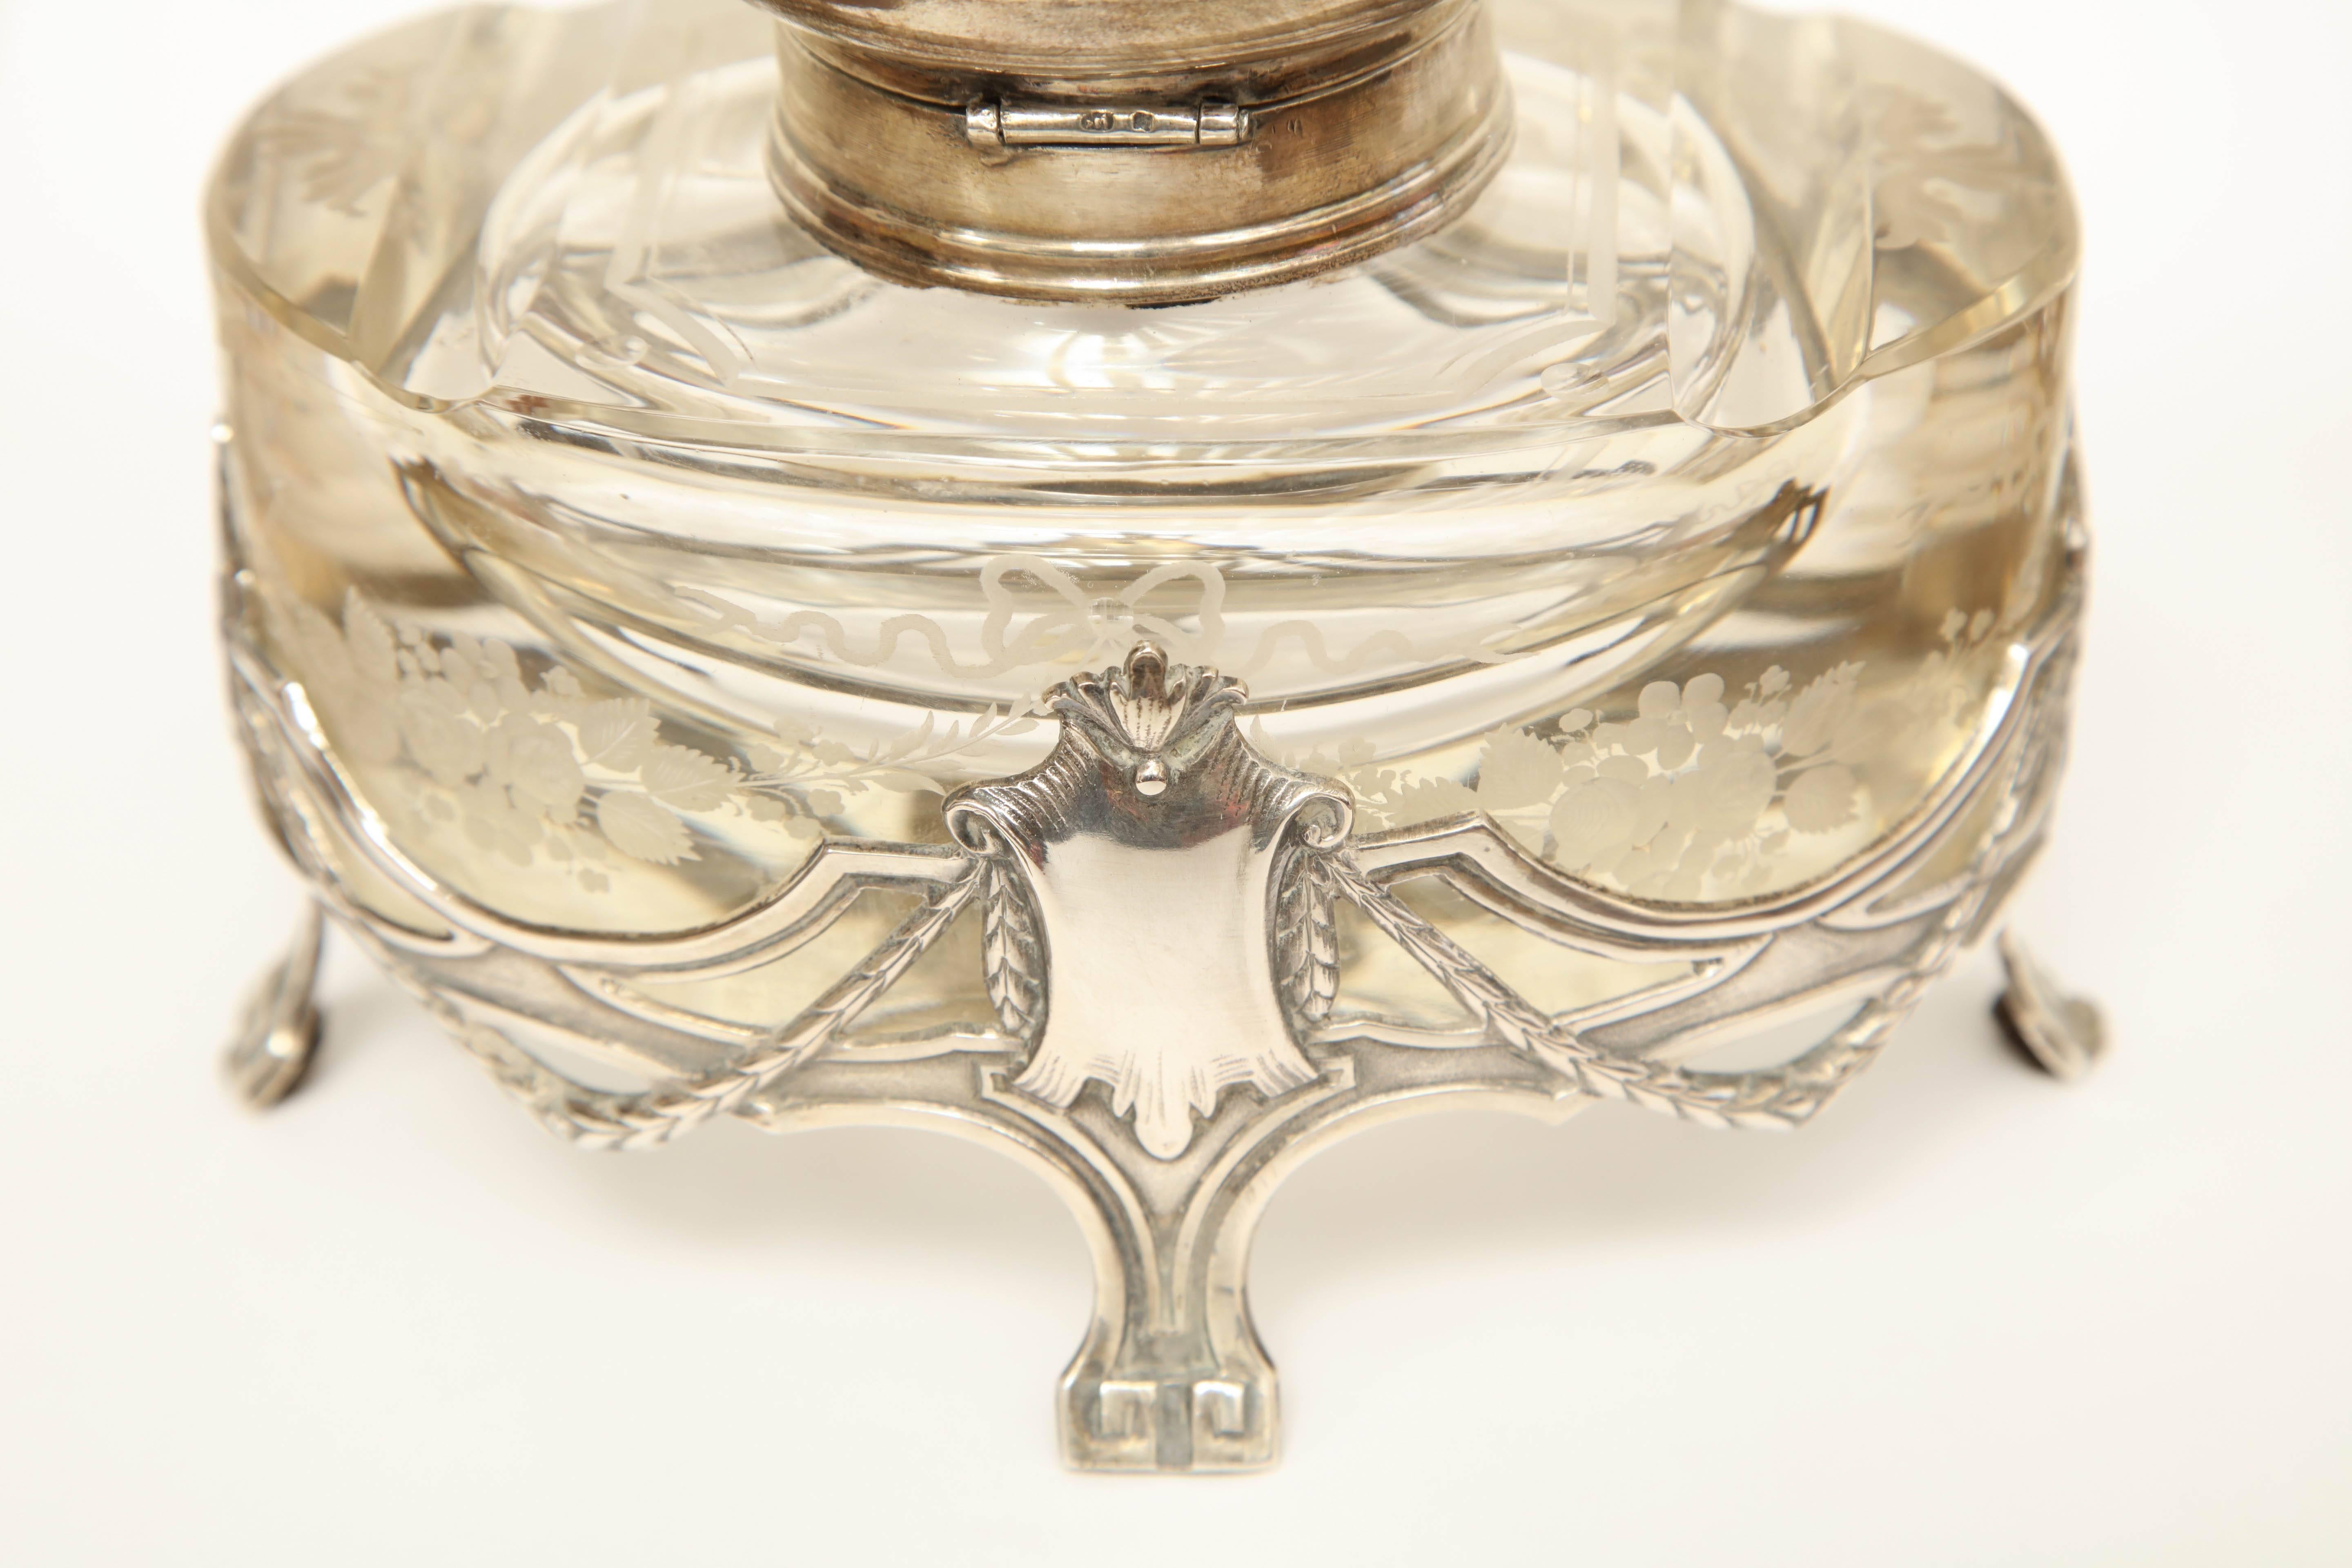 Early 20th Century Art Nouveau German Silver and Glass Inkwell For Sale 4